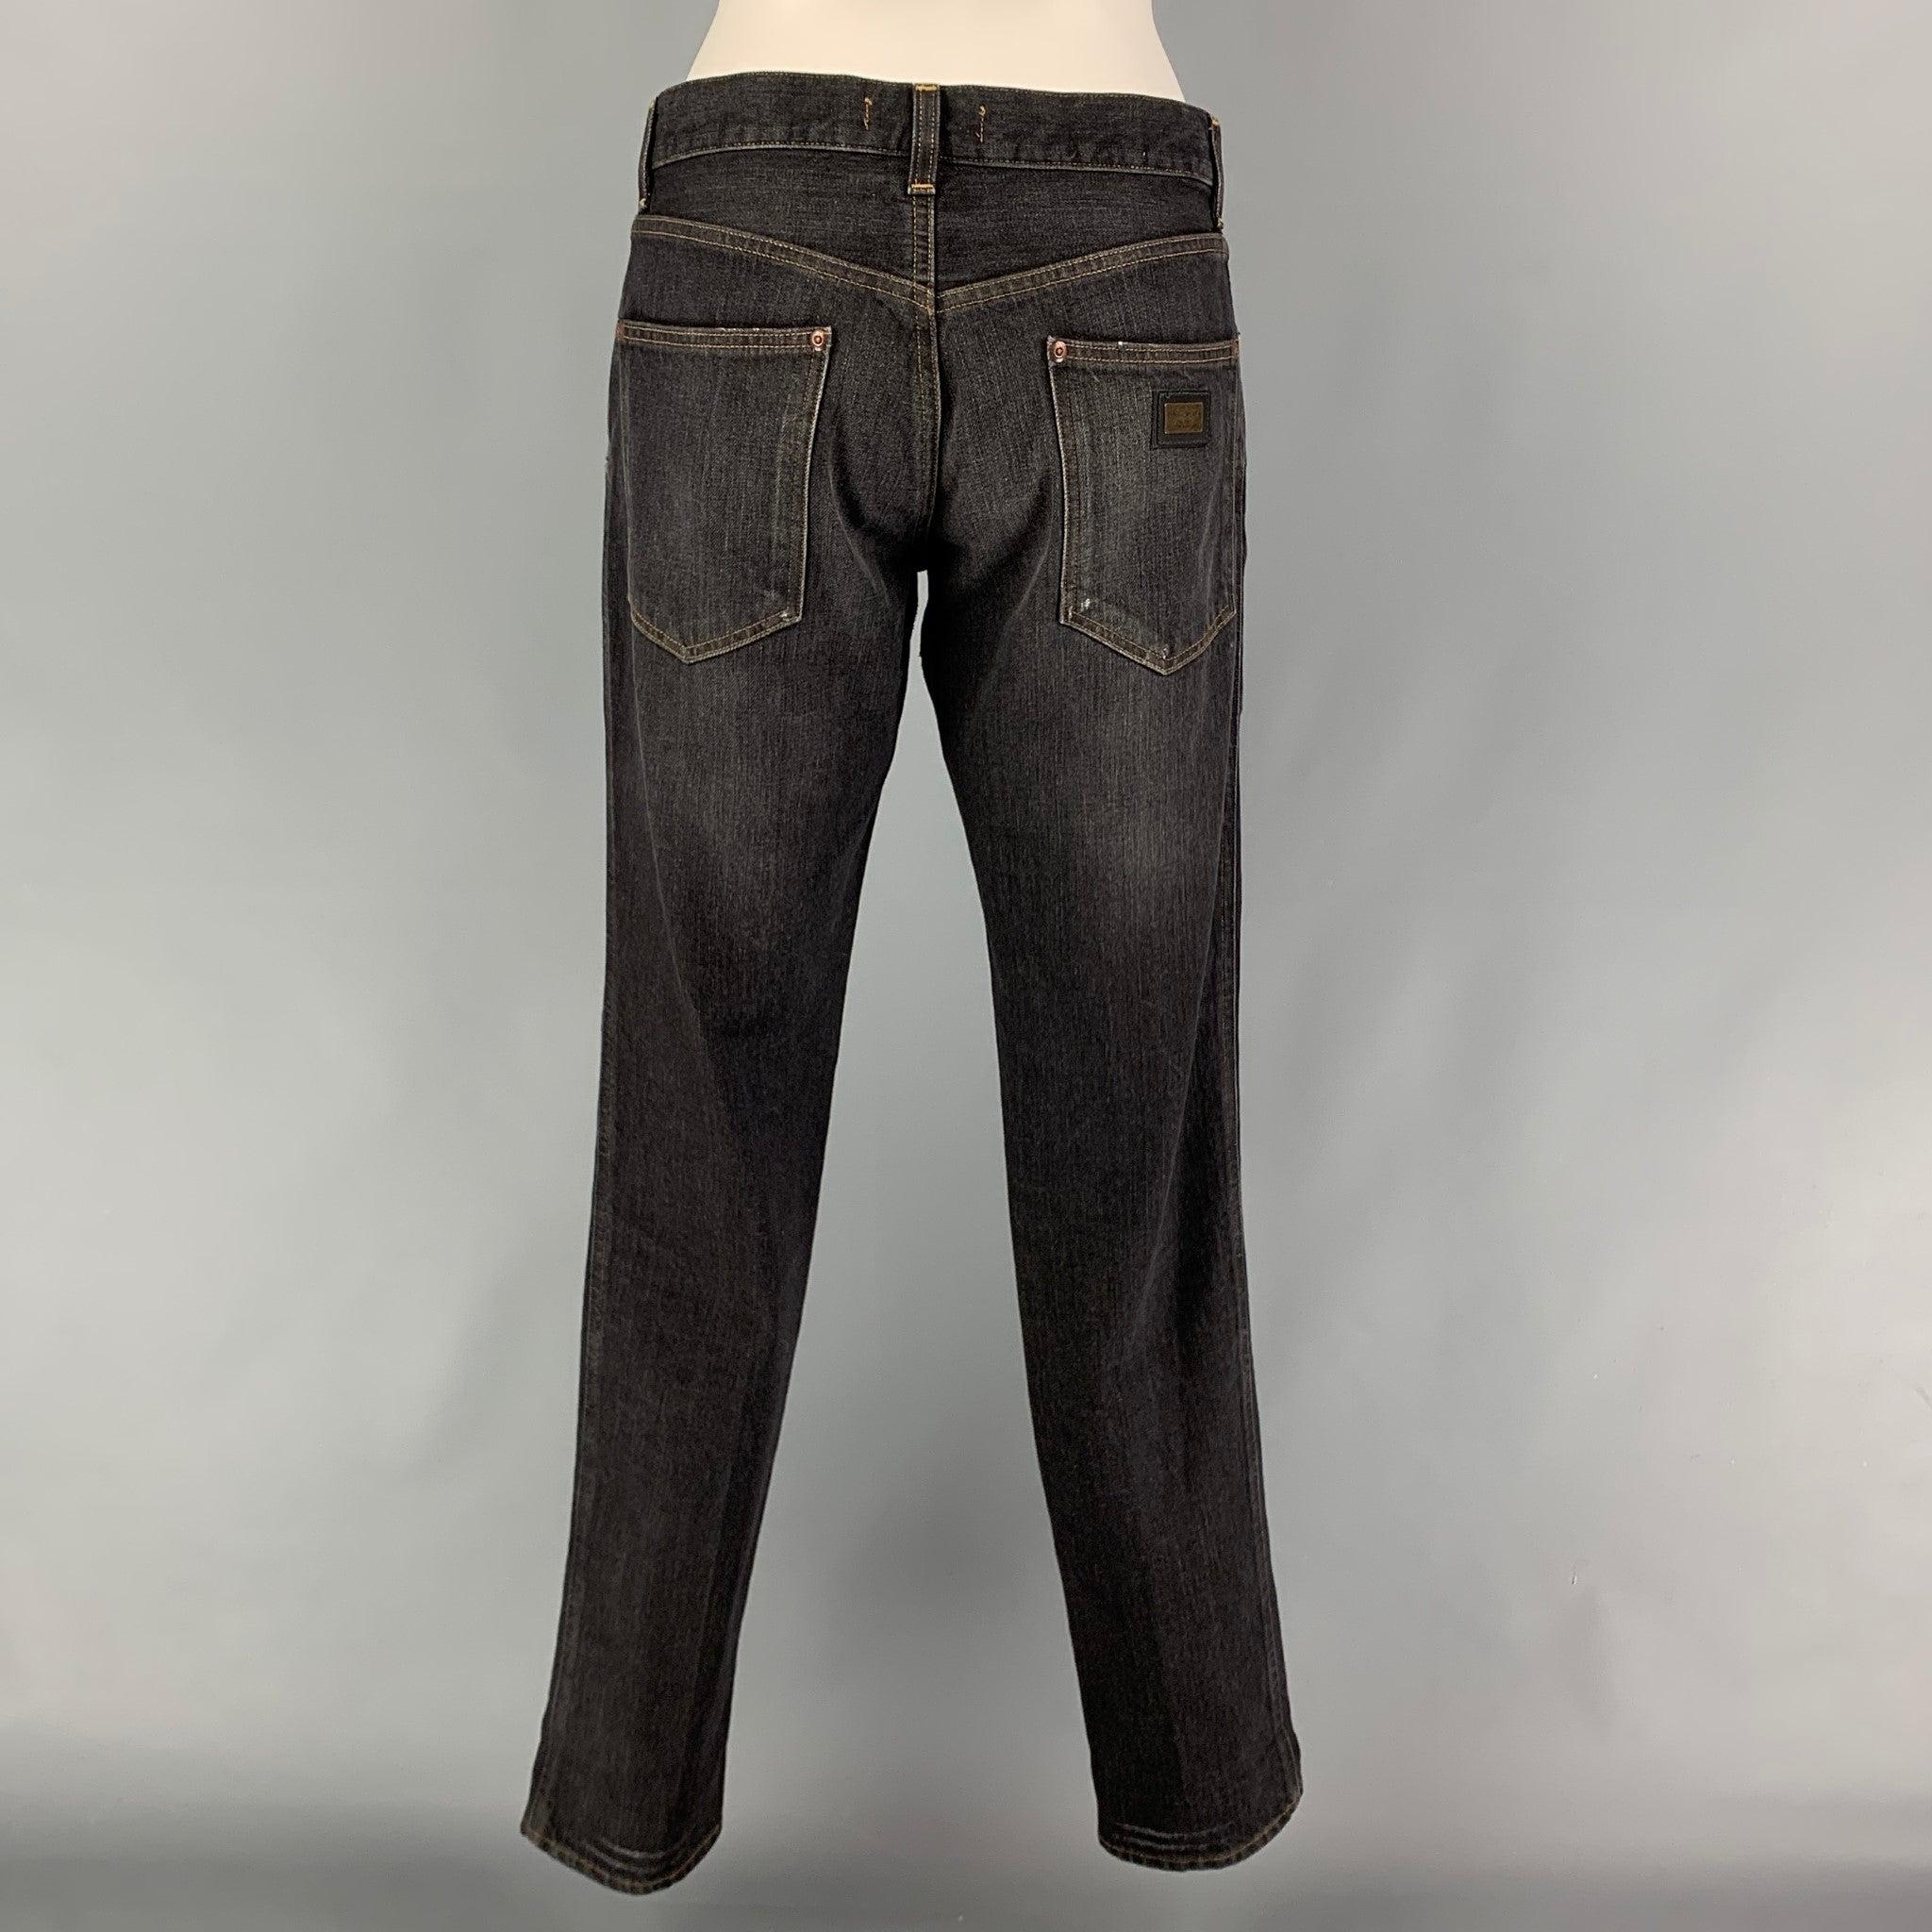 DOLCE & GABBANA jeans comes in a grey distressed cotton denim featuring a straight leg, contrast stitching, back logo emblem, and a zip fly closure. Made in Italy.
 Very Good
 Pre-Owned Condition. 
 

 Marked:  46 
 

 Measurements: 
  Waist: 34